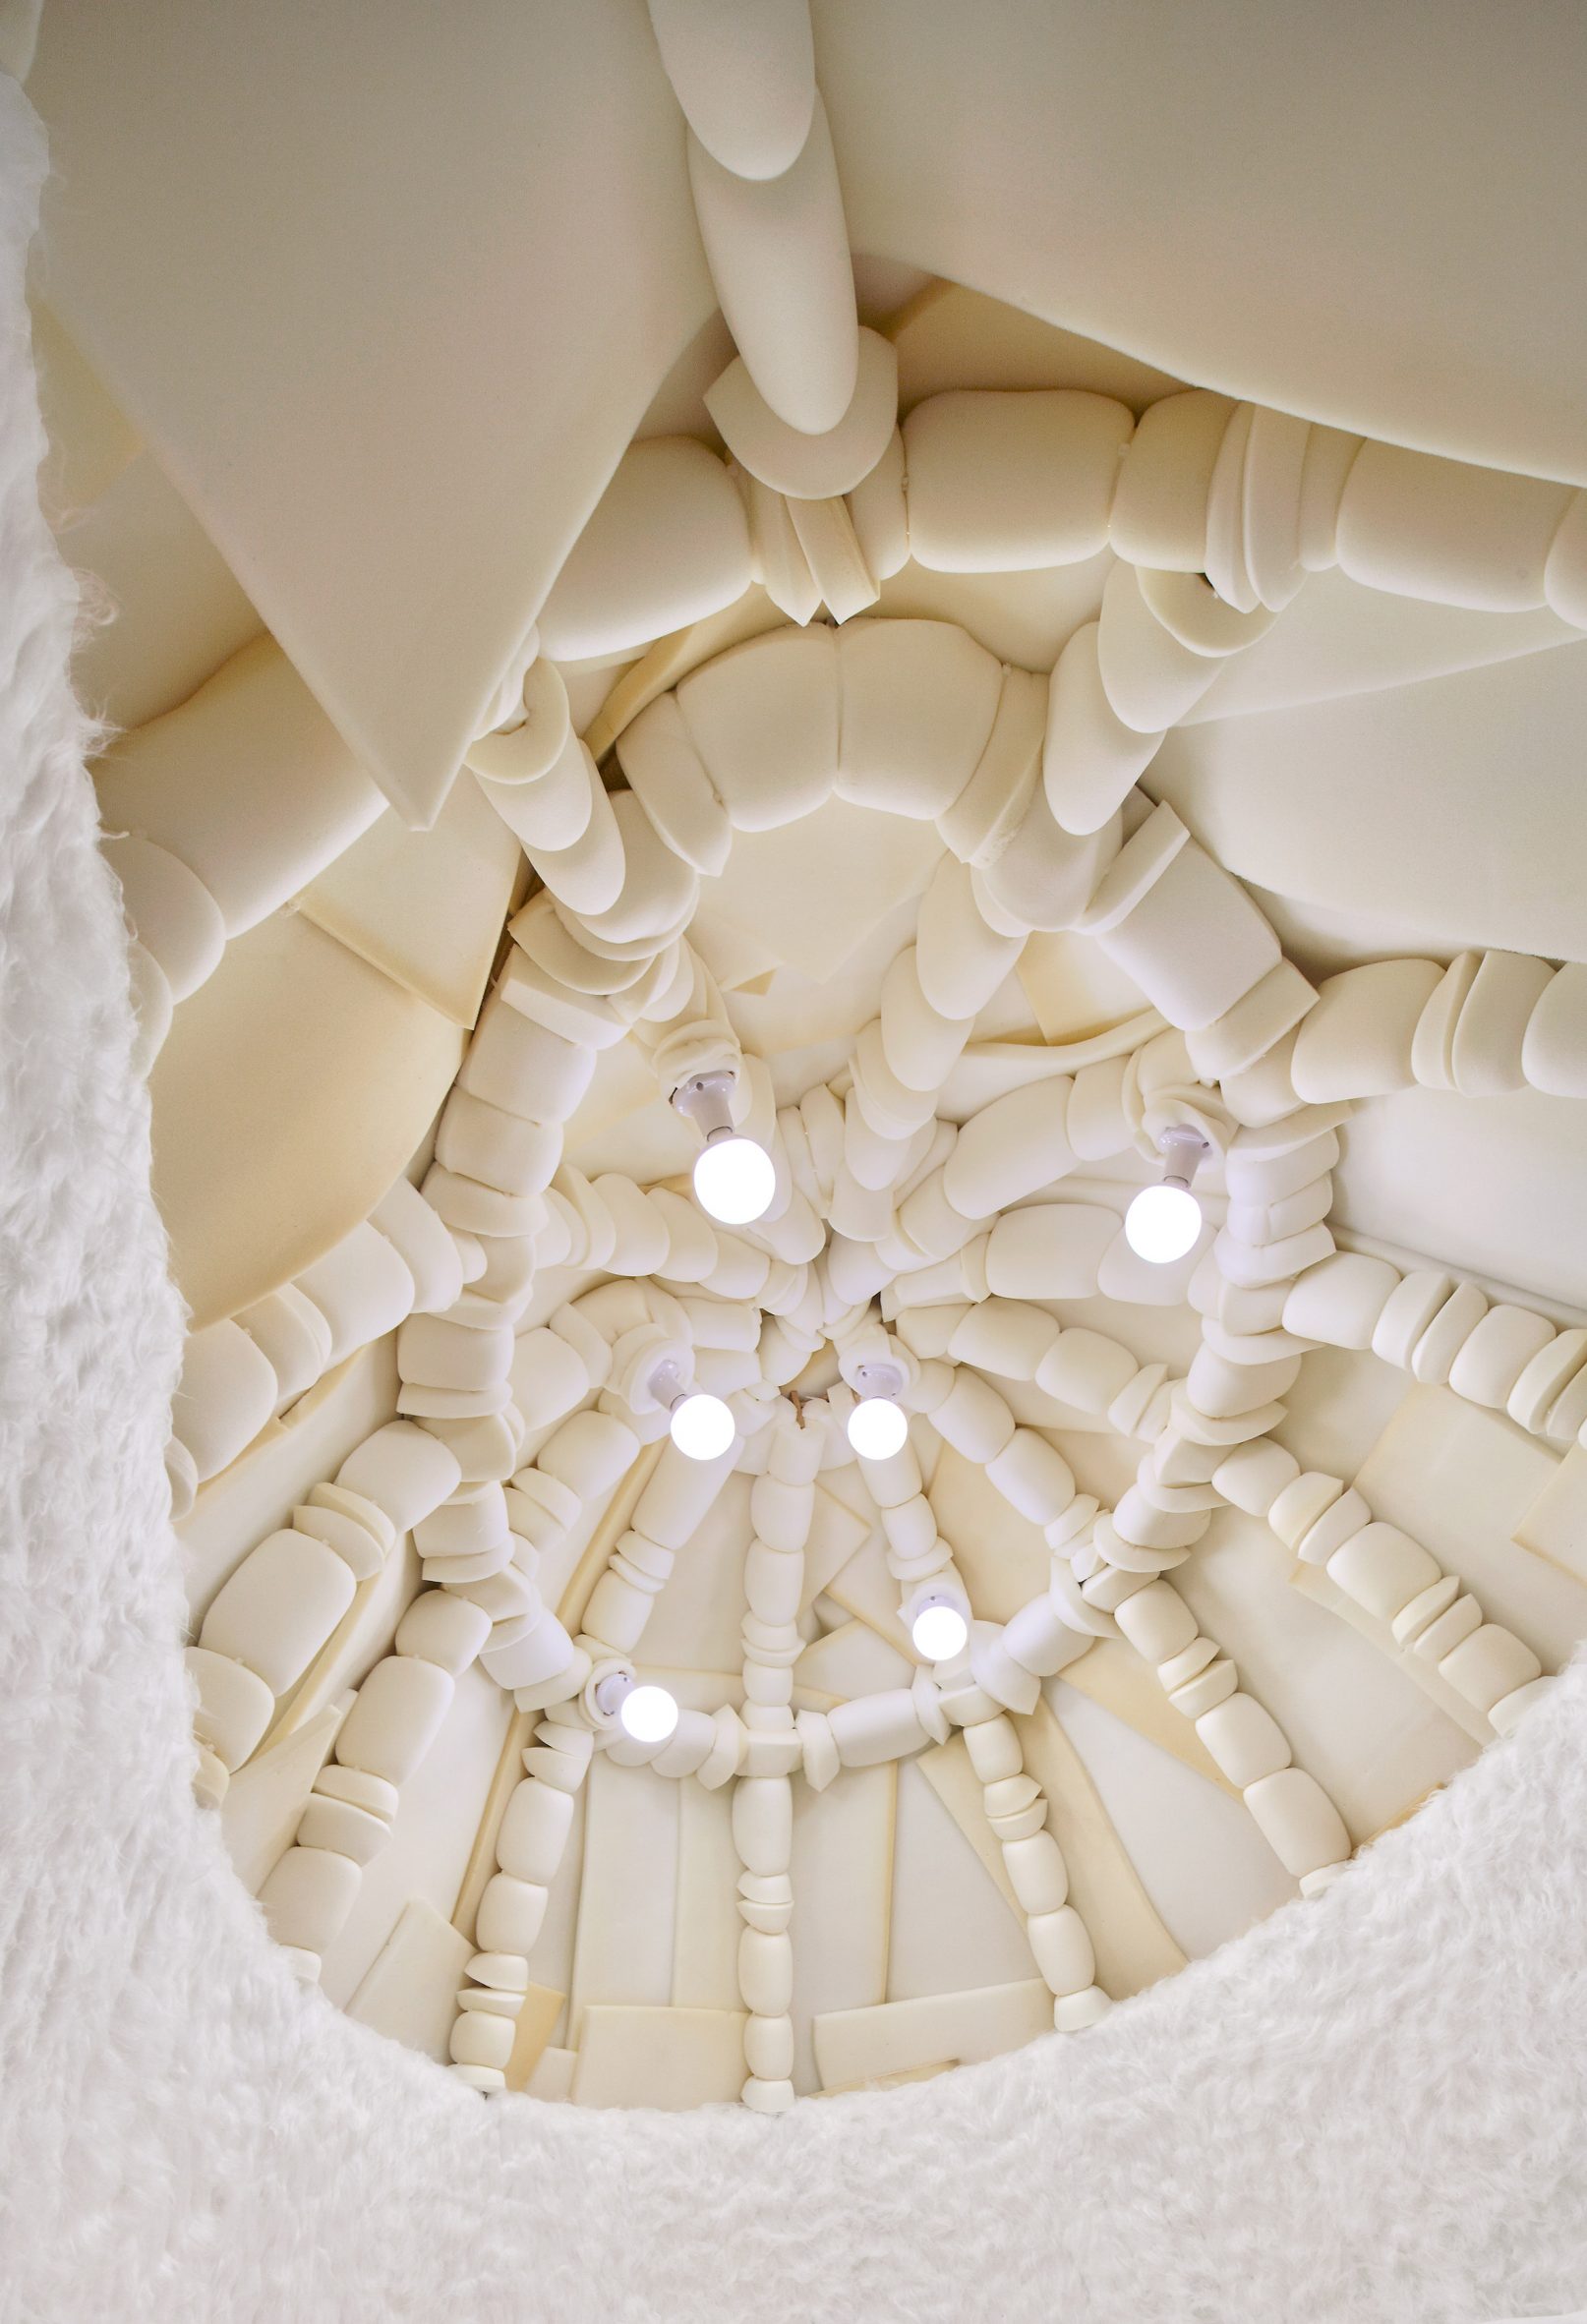 Foam-covered ceiling of winter bedroom with six bulb lights